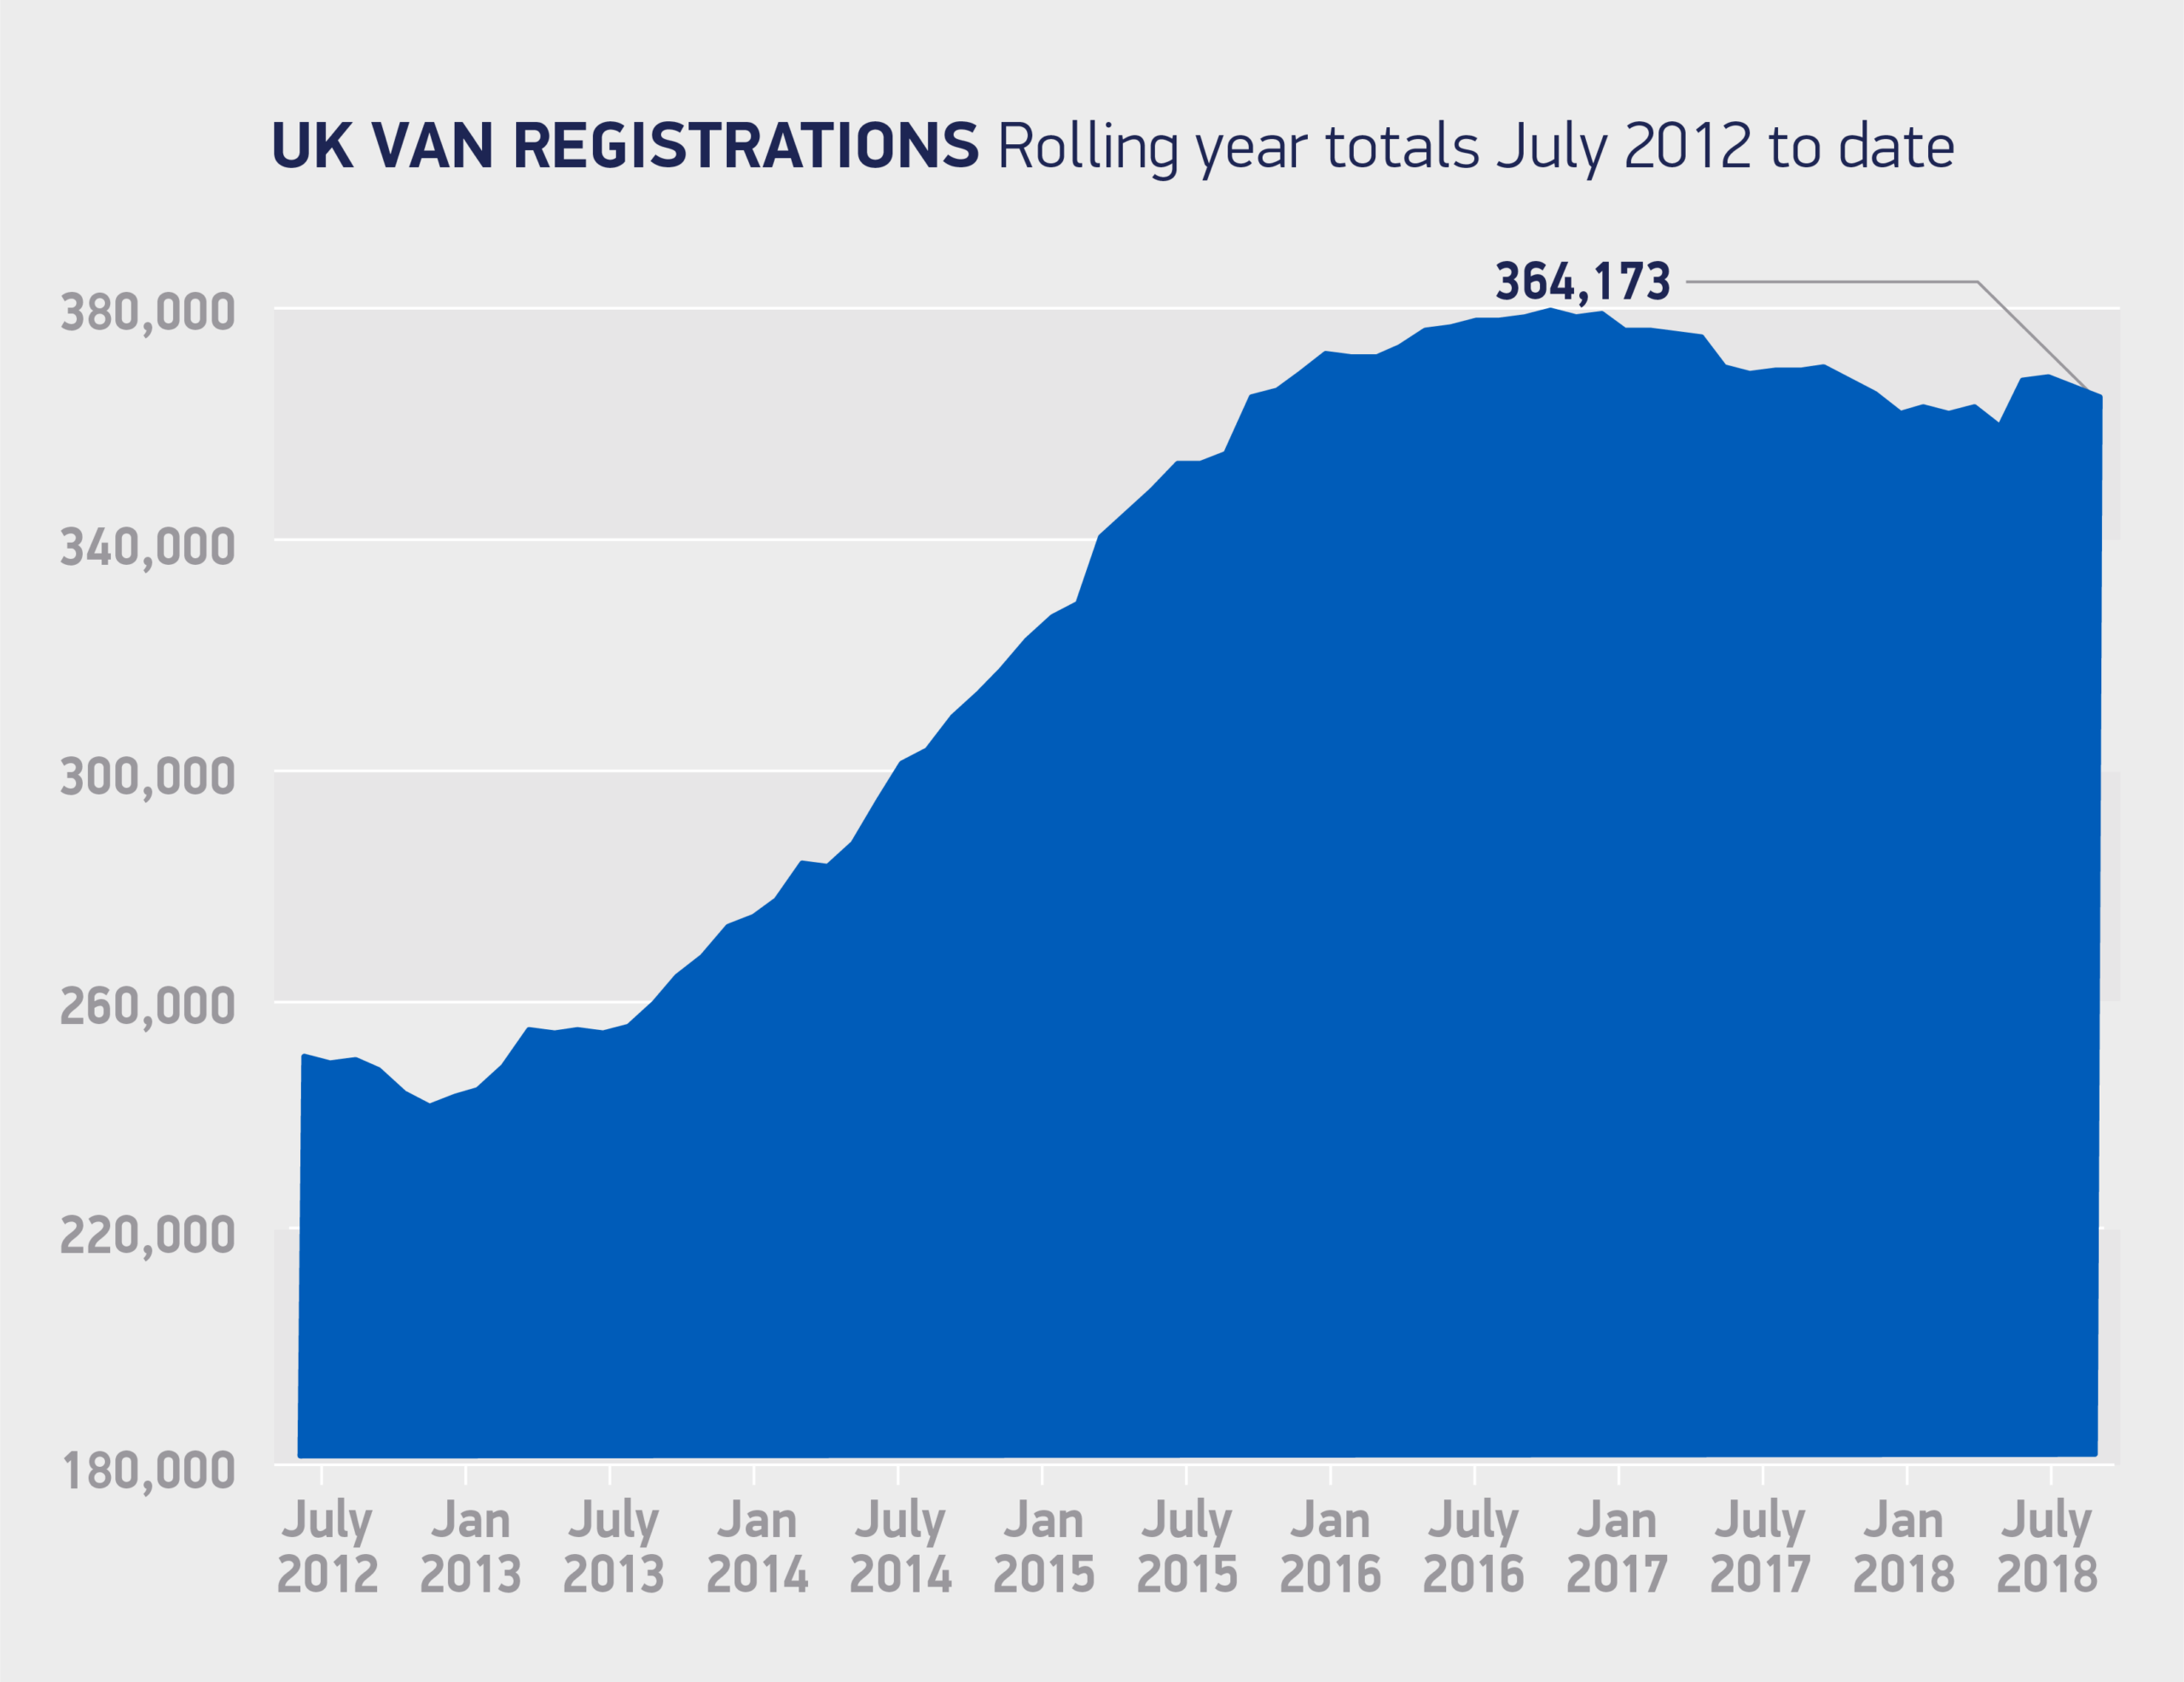 Van registrations rolling year totals July 2012 to date 2018 chart